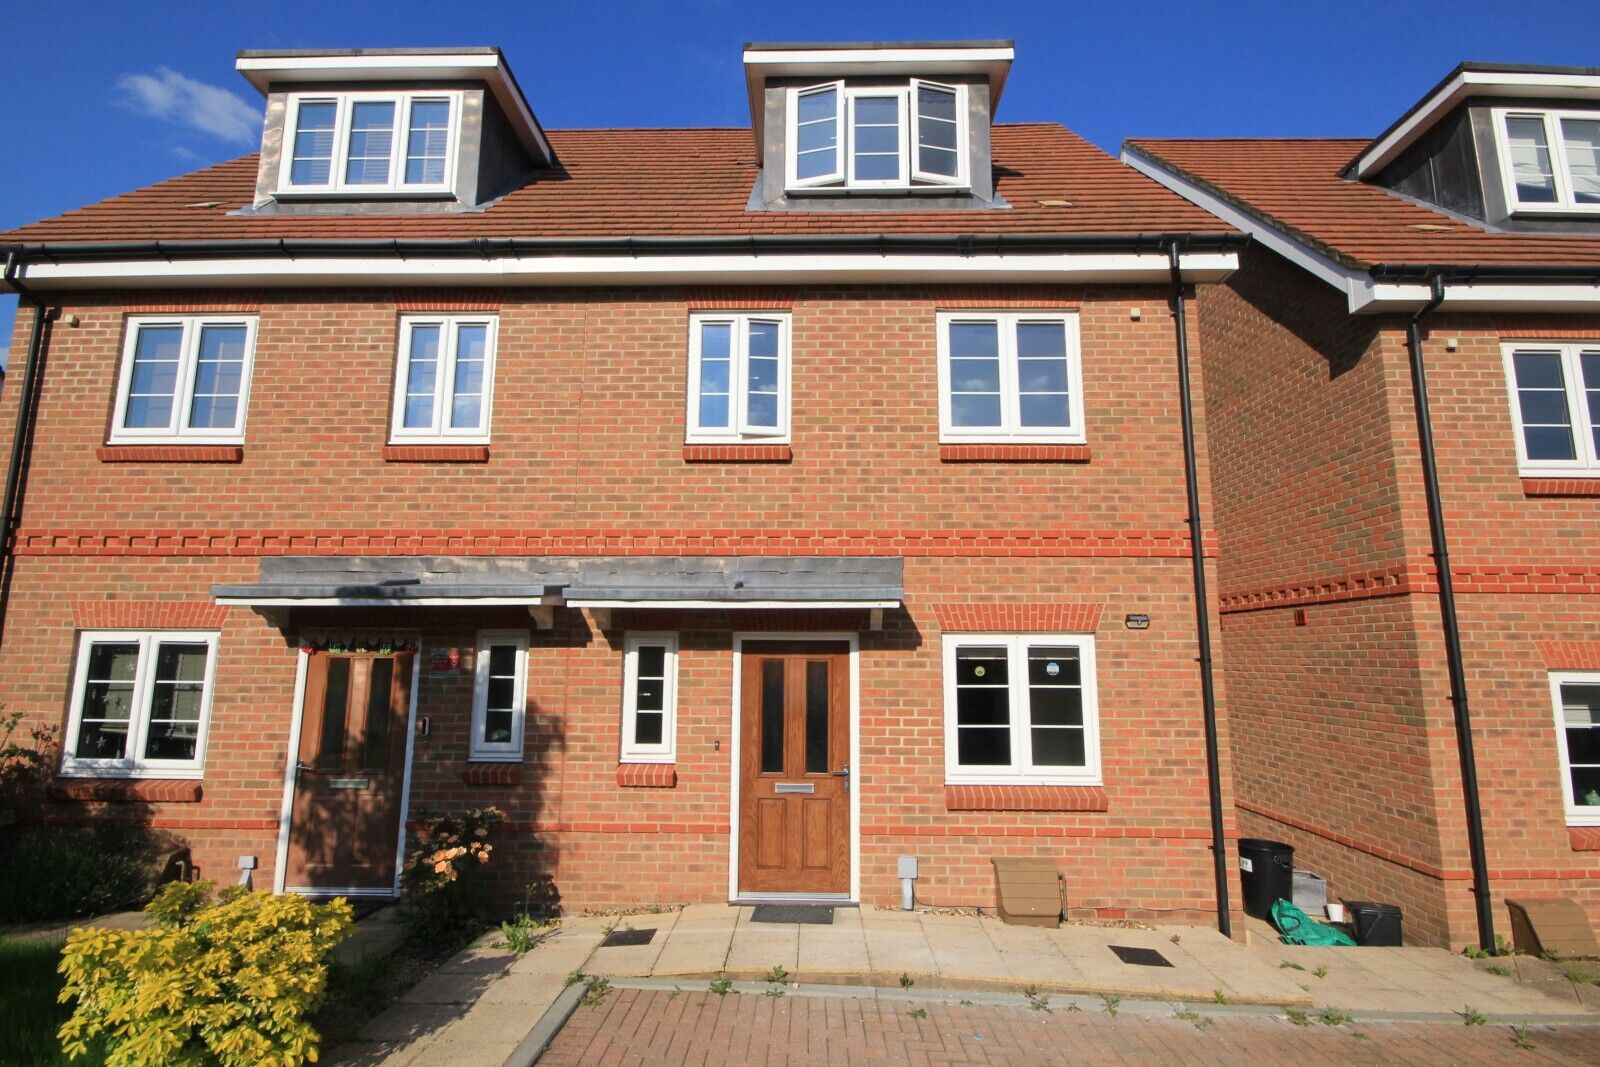 4 bedroom semi detached house to rent, Available unfurnished from 12/07/2027 Louden Square, Reading, RG6, main image